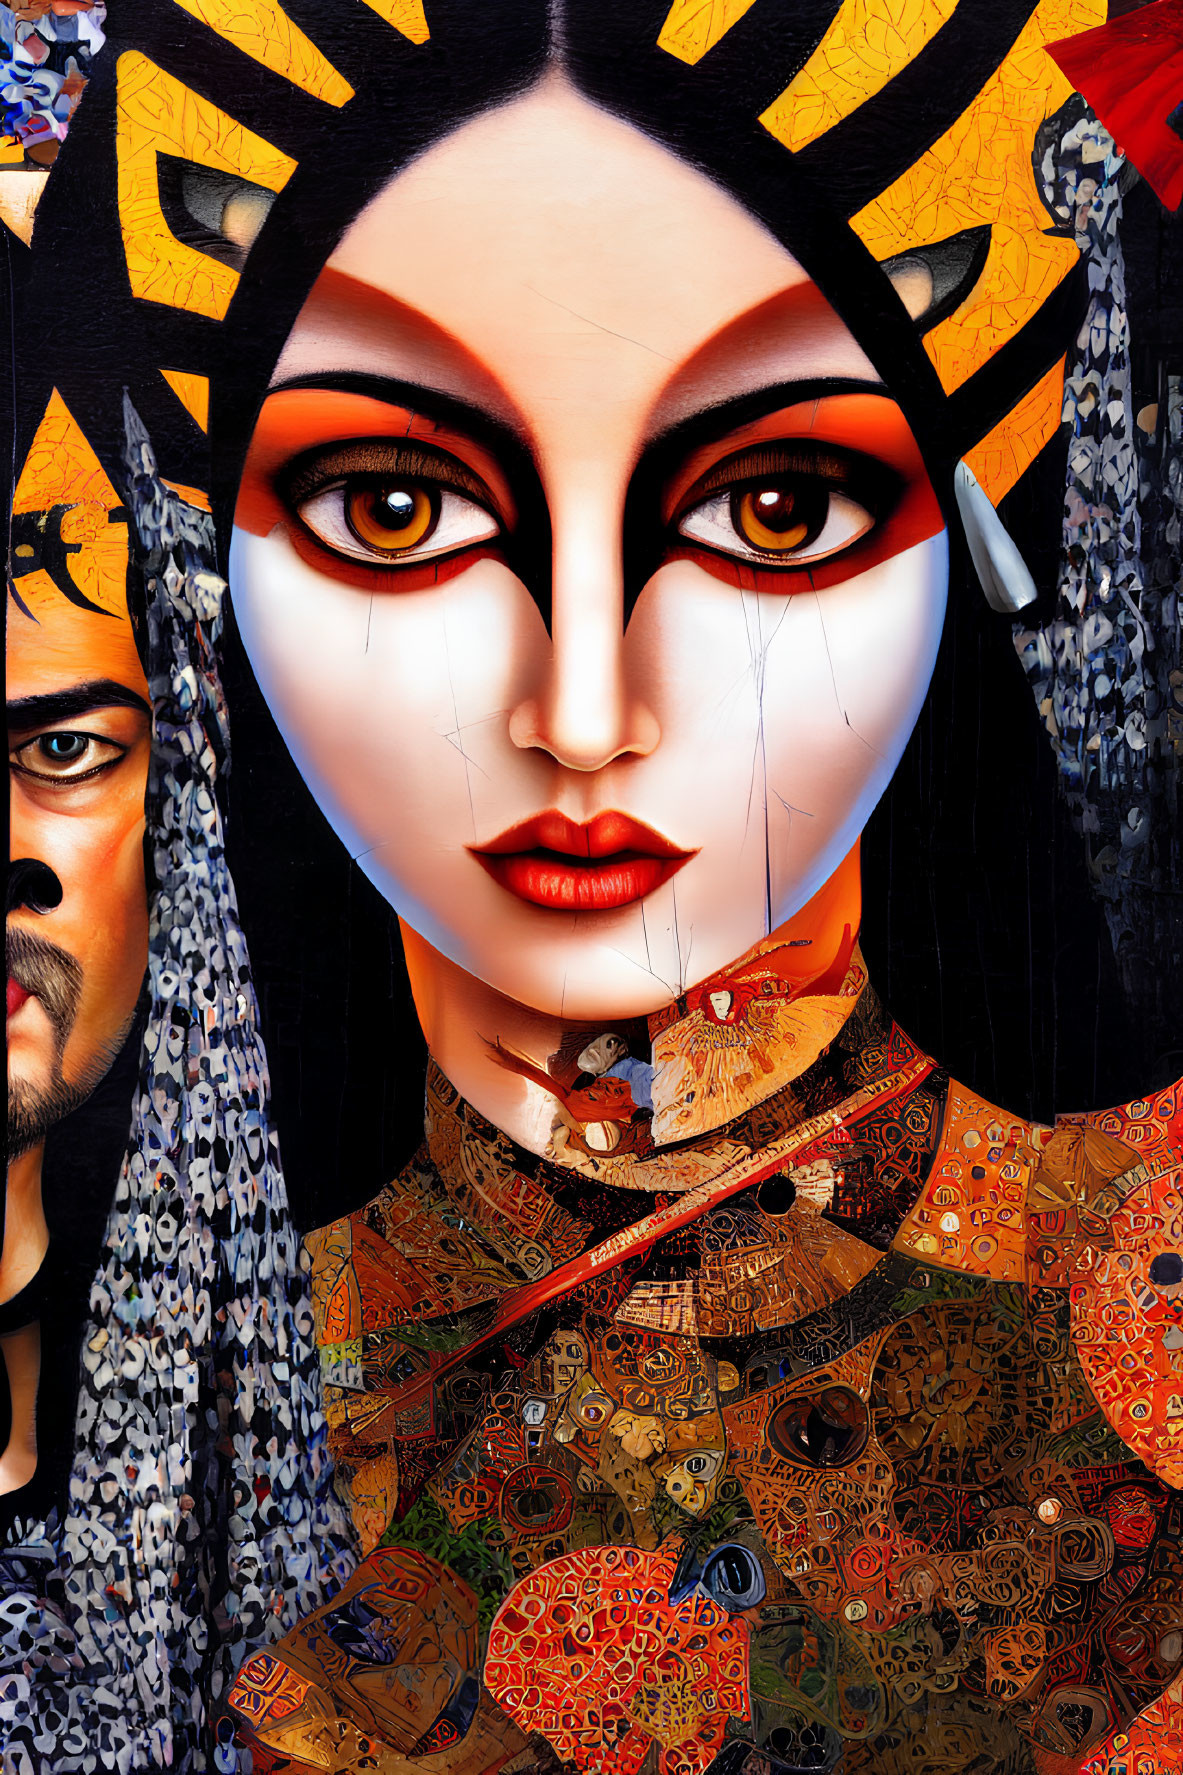 Colorful painting of stylized faces: male on left, female figure with intense eyes, elaborate makeup